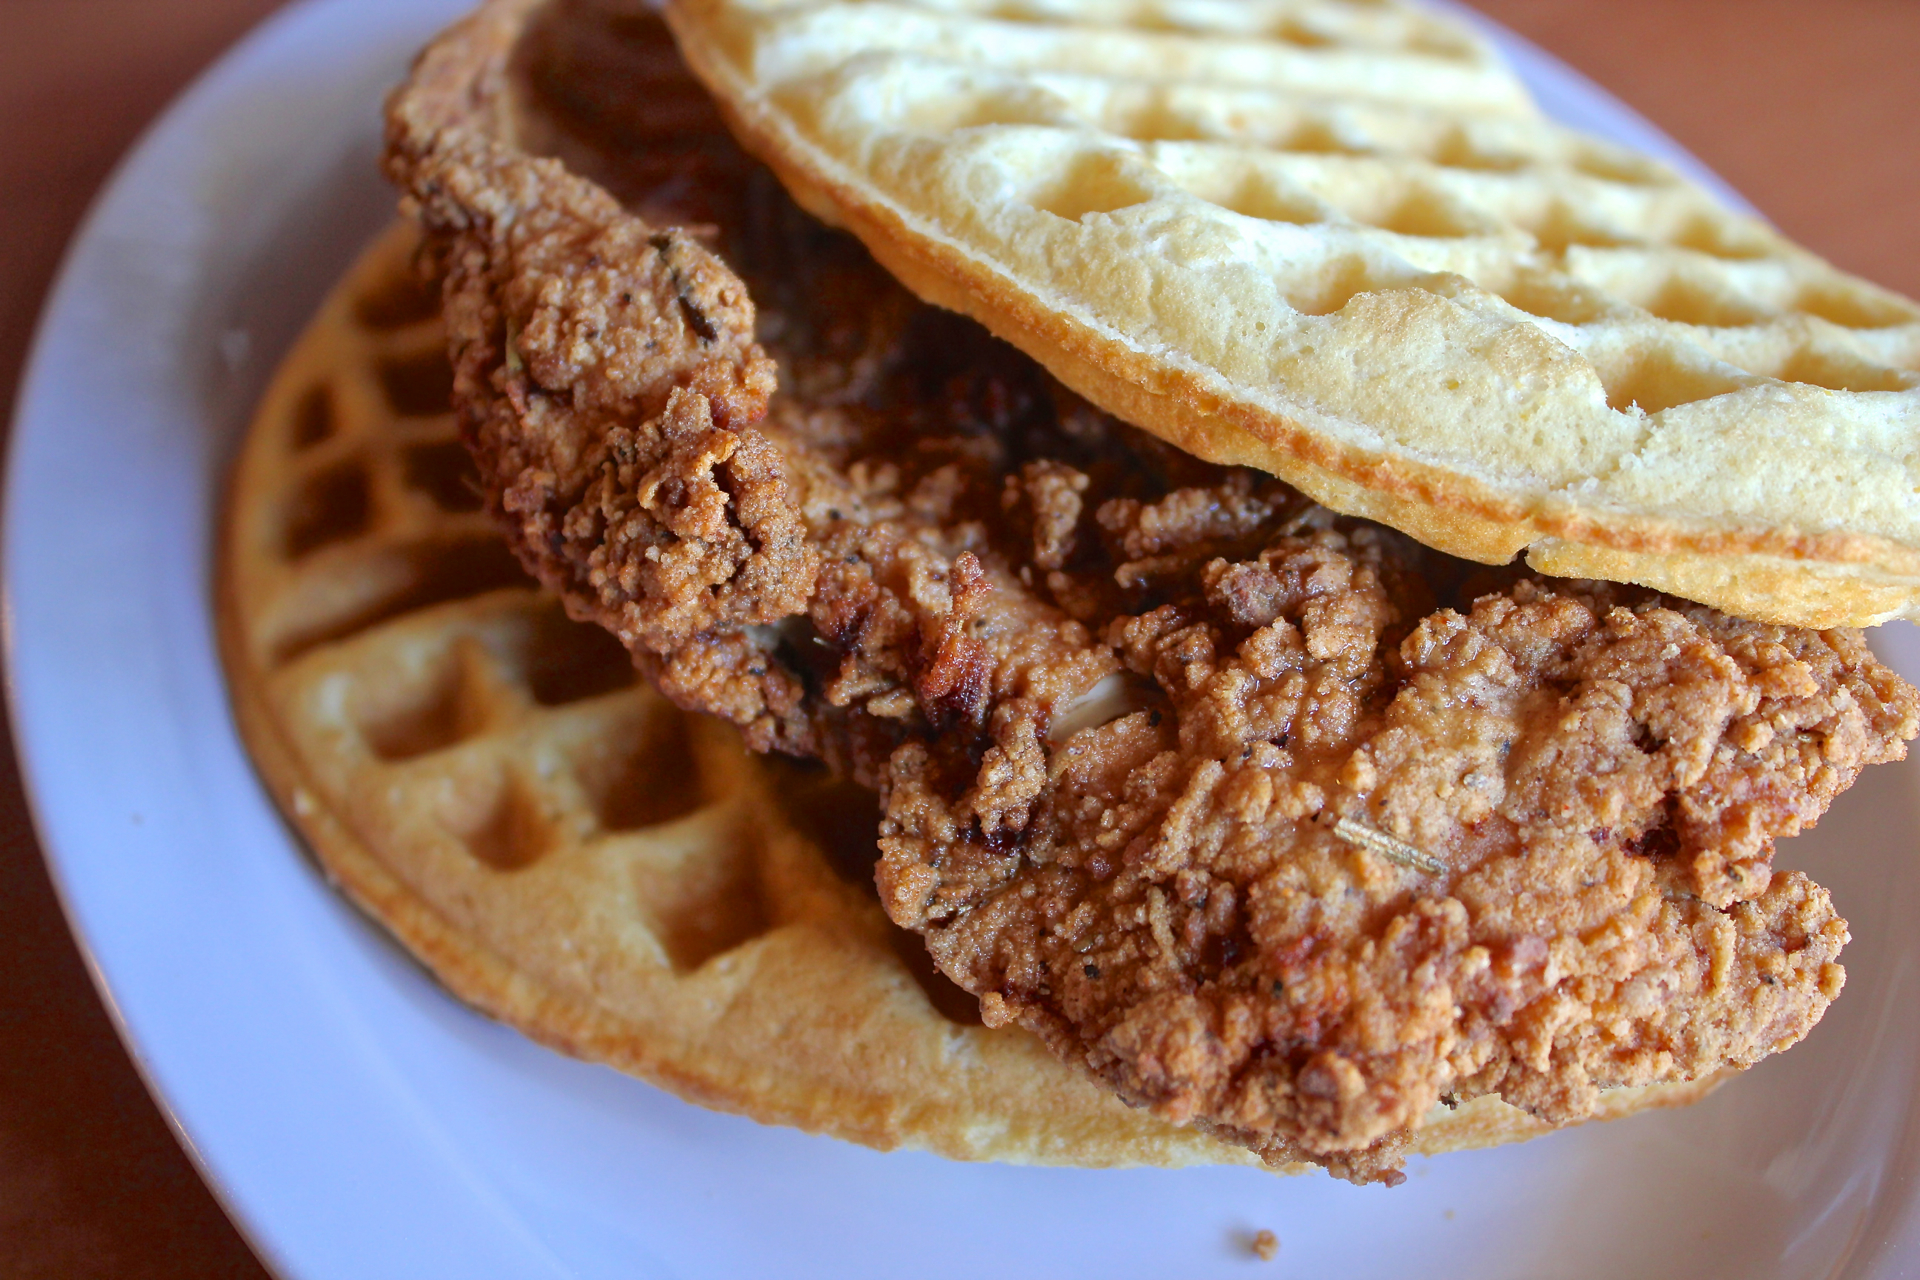 The Chicken ‘N Waffle at Butter & Zeus.